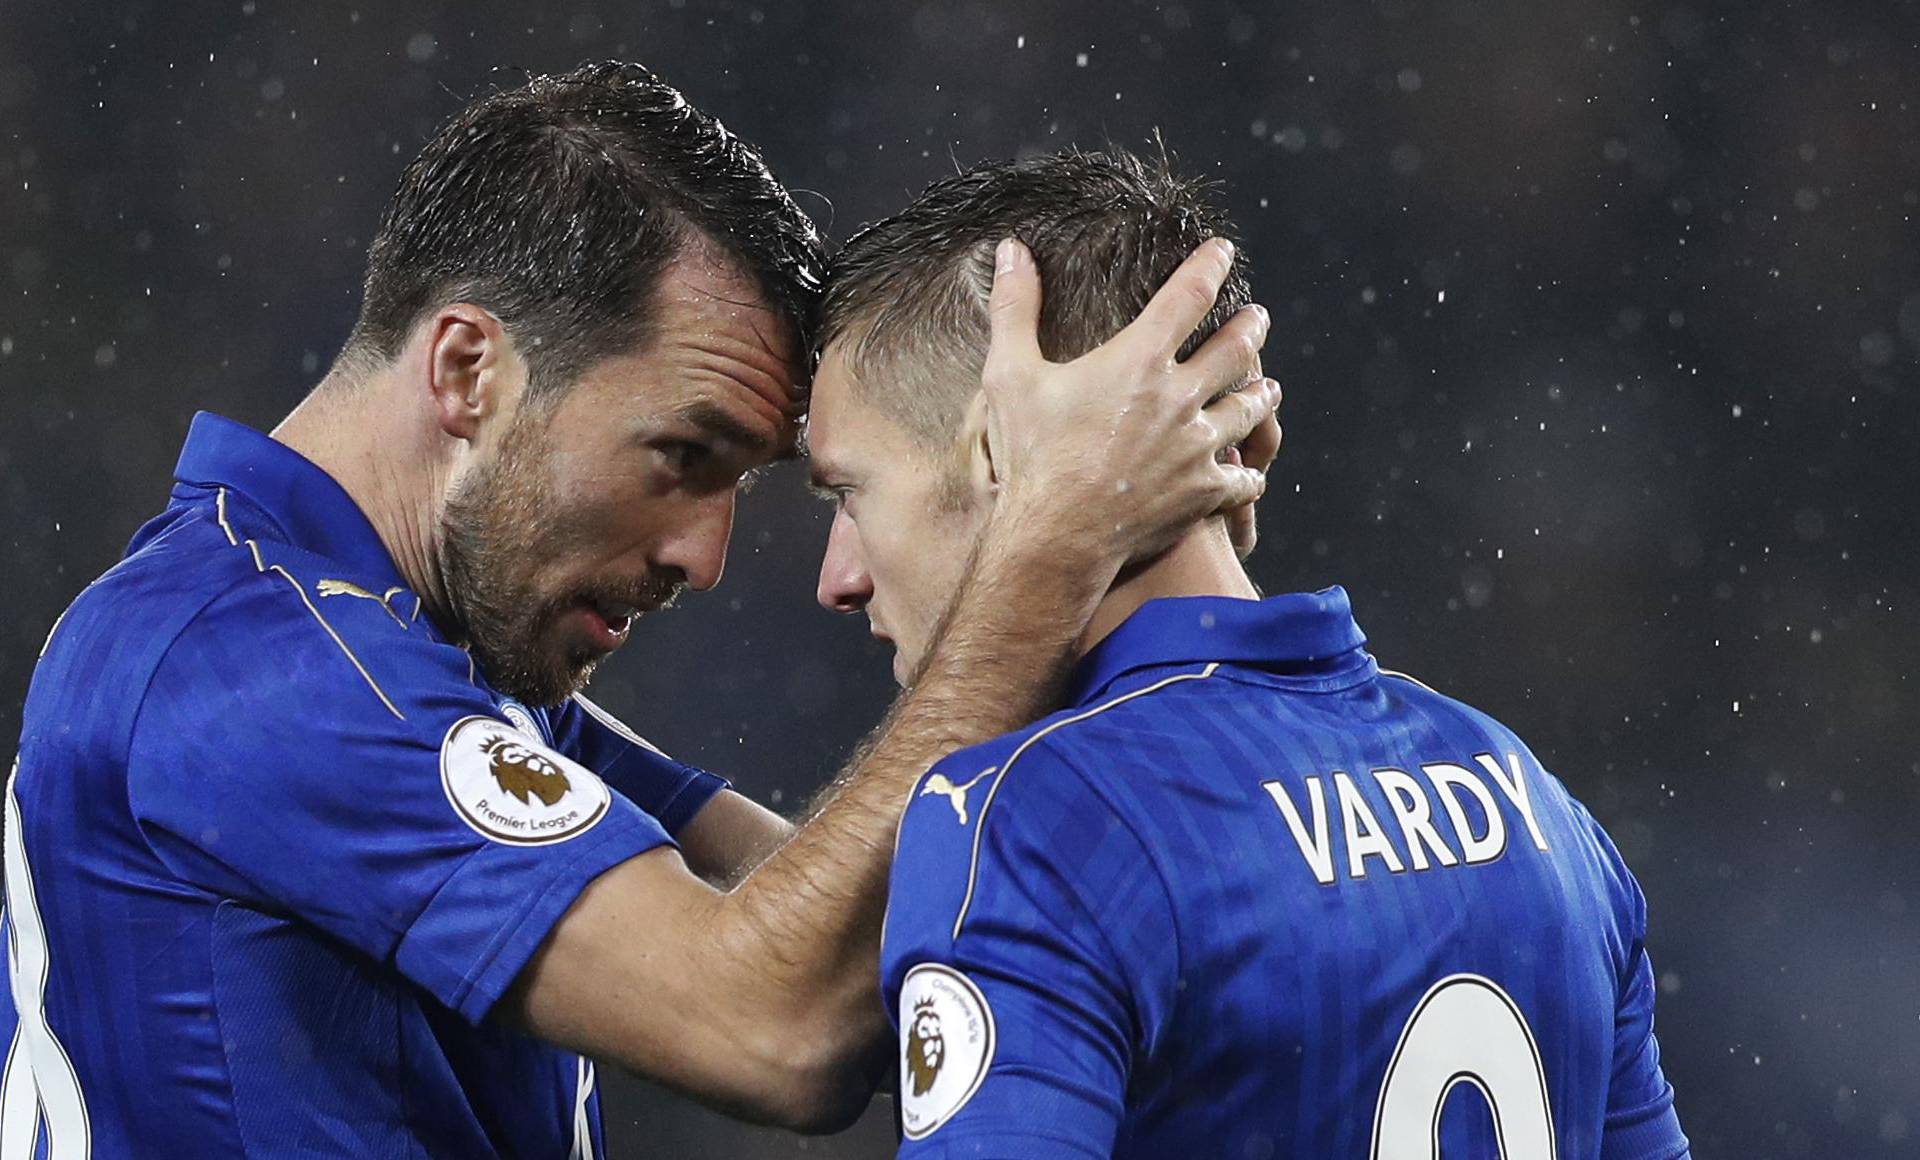 Leicester City's Jamie Vardy celebrates scoring their first goal with Christian Fuchs